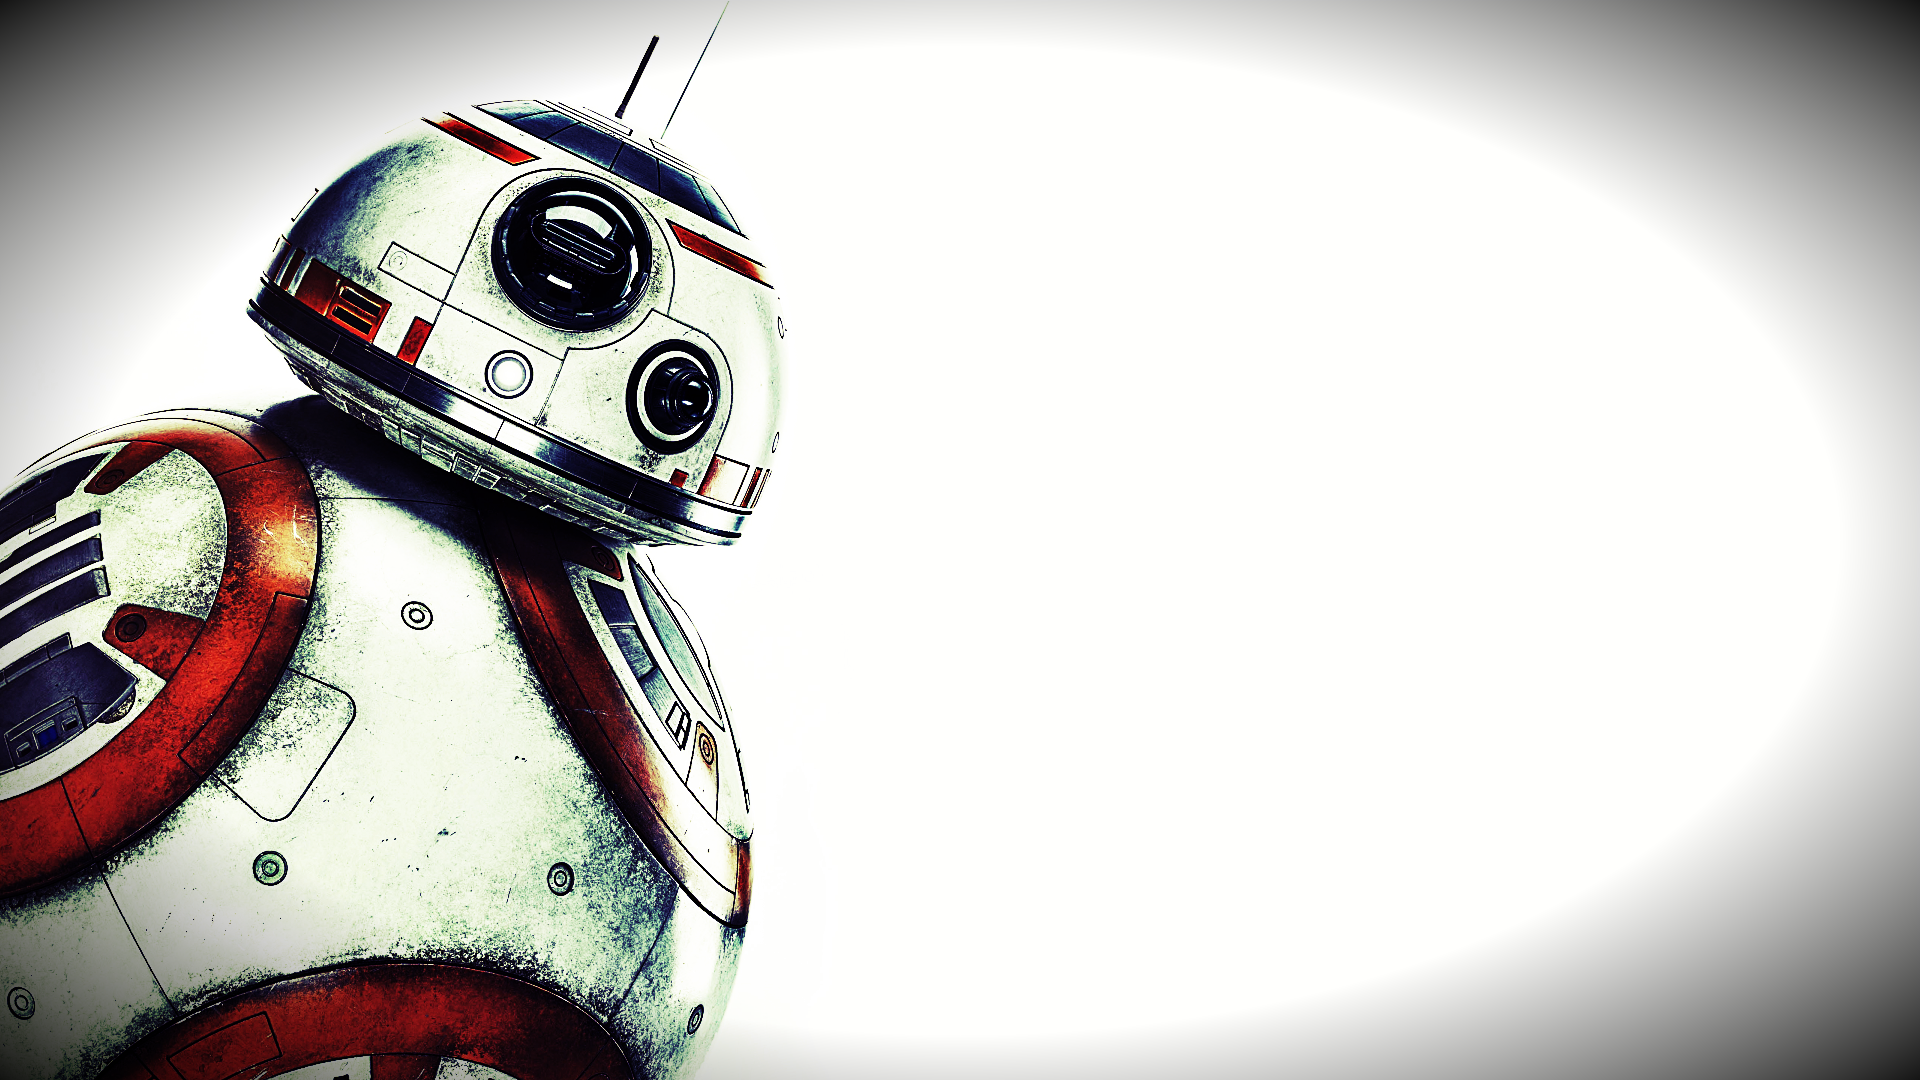 General 1920x1080 BB-8 movie poster Star Wars simple background robot Star Wars Droids Star Wars: The Force Awakens movies Star Wars Heroes white background science fiction